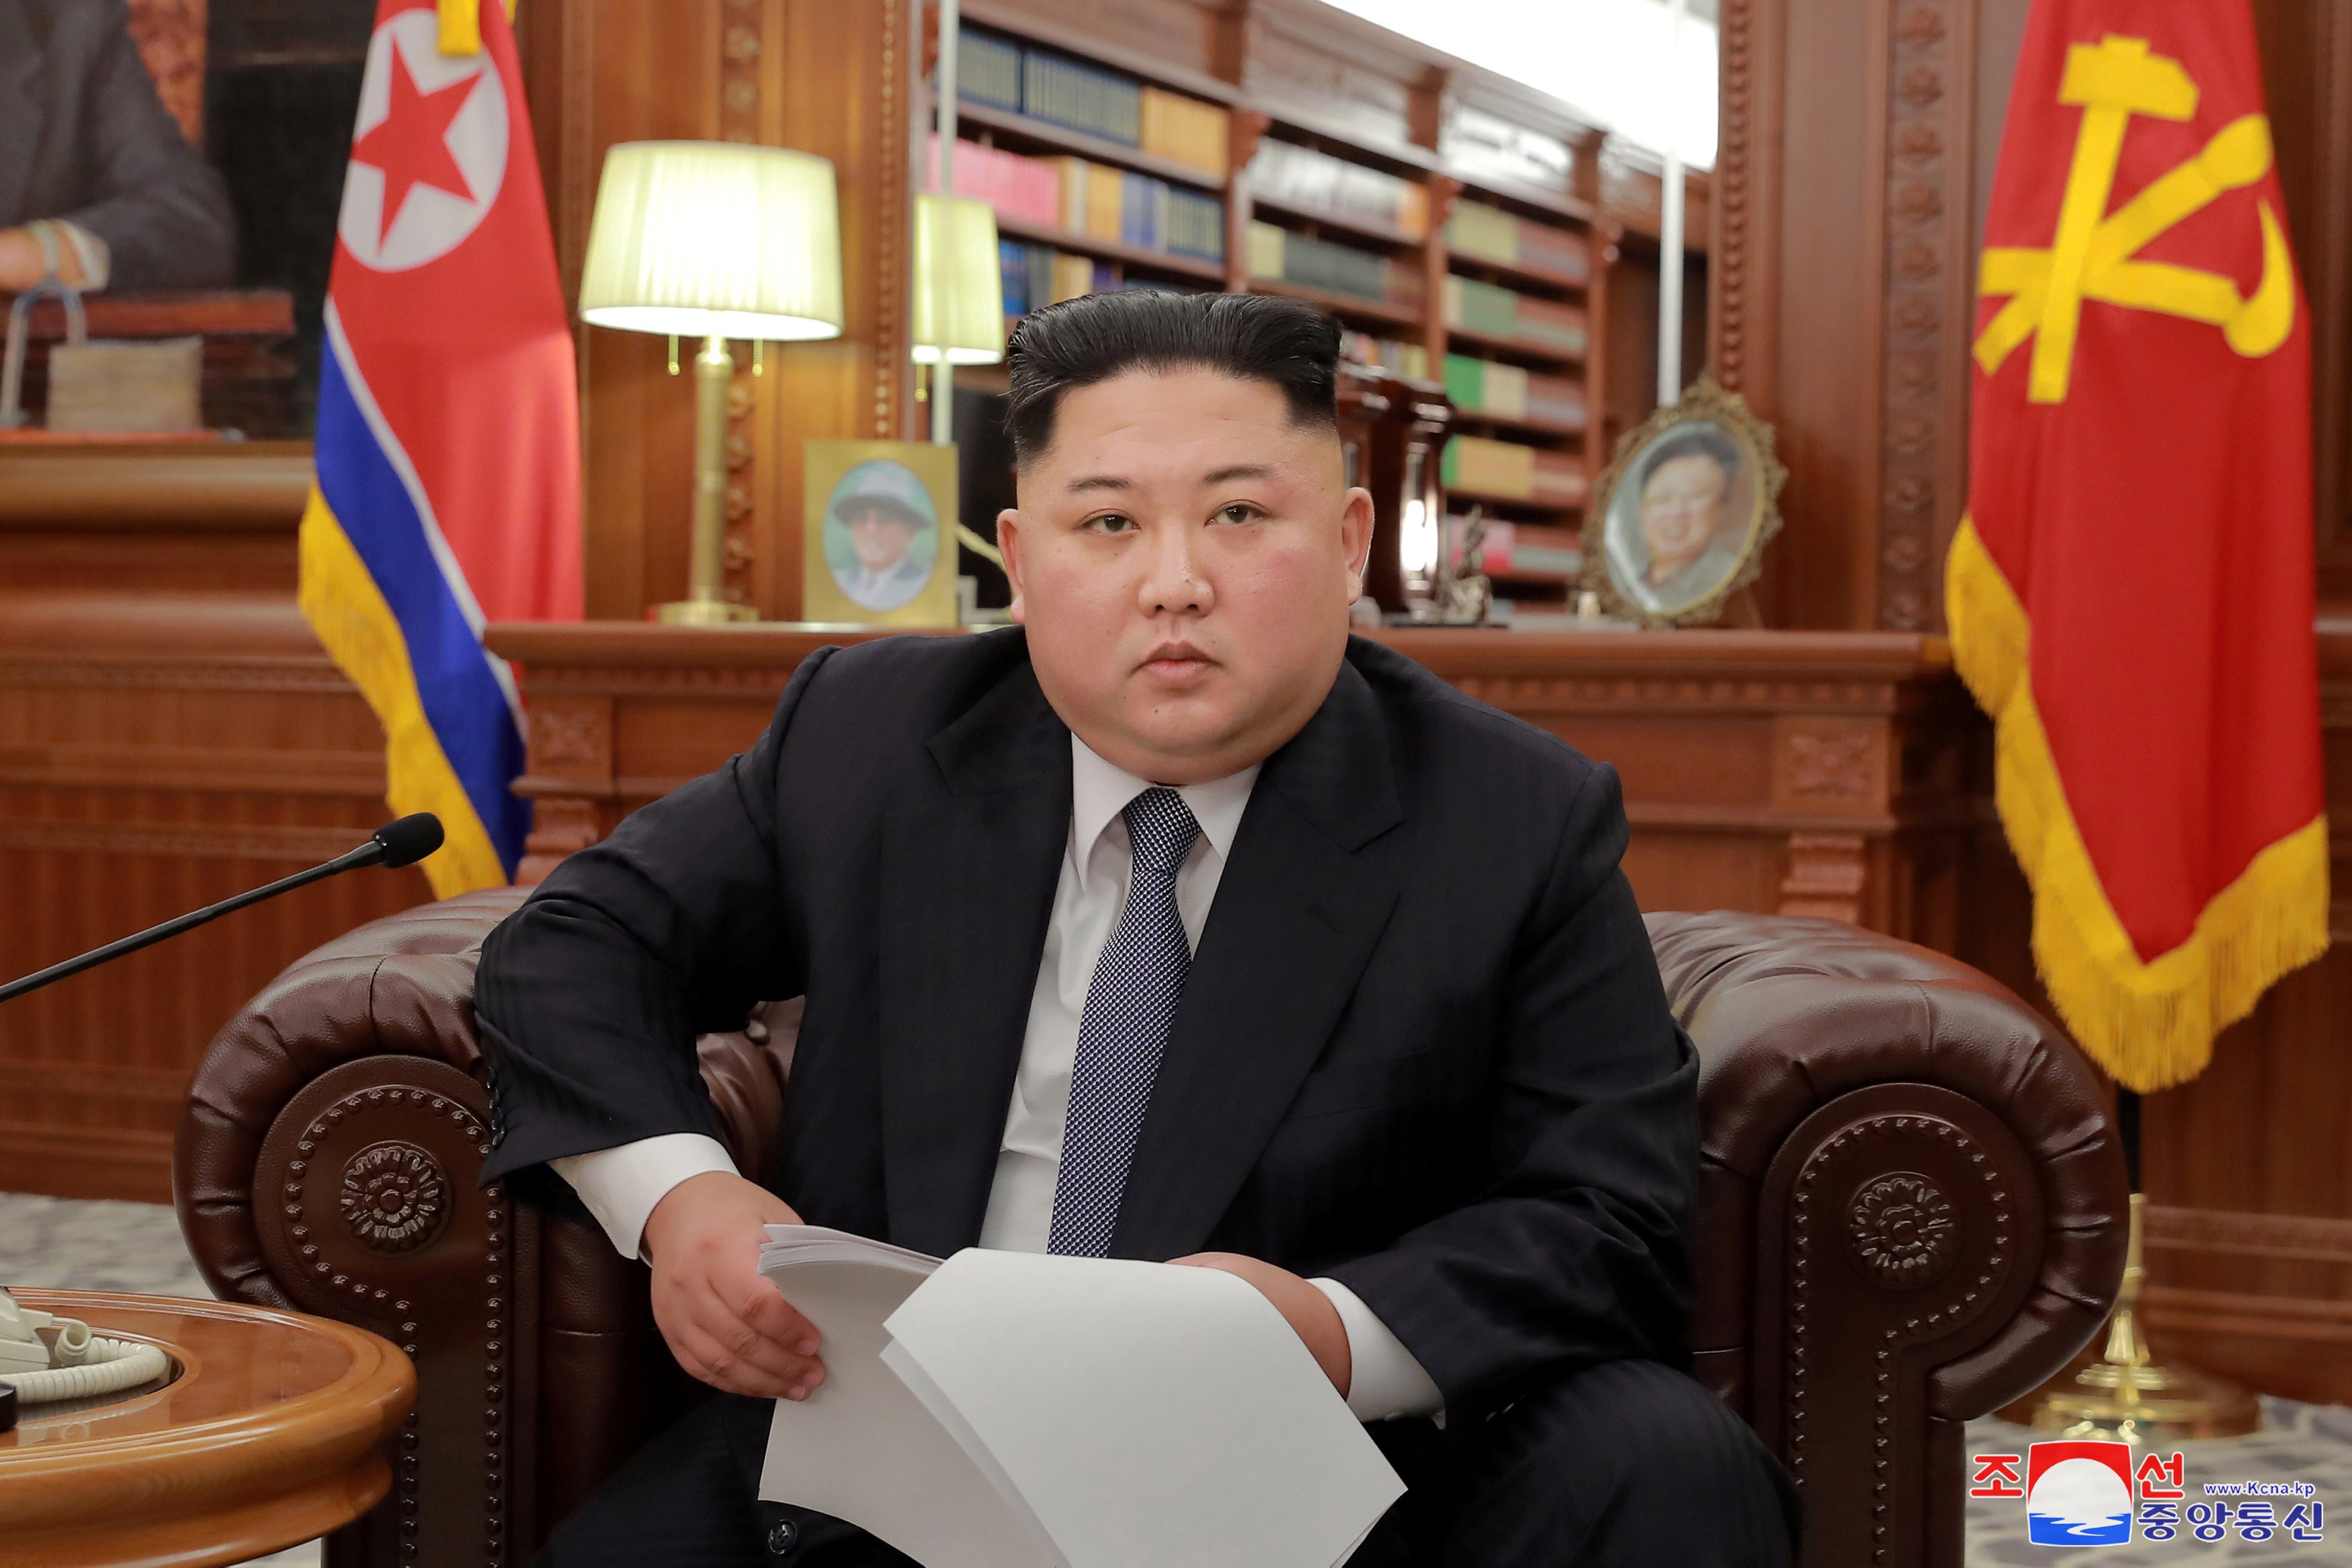 North Korean leader Kim Jon-un’s New Year speech saw him come across as an assured modern leader, in control on the world stage. Photo: Reuters